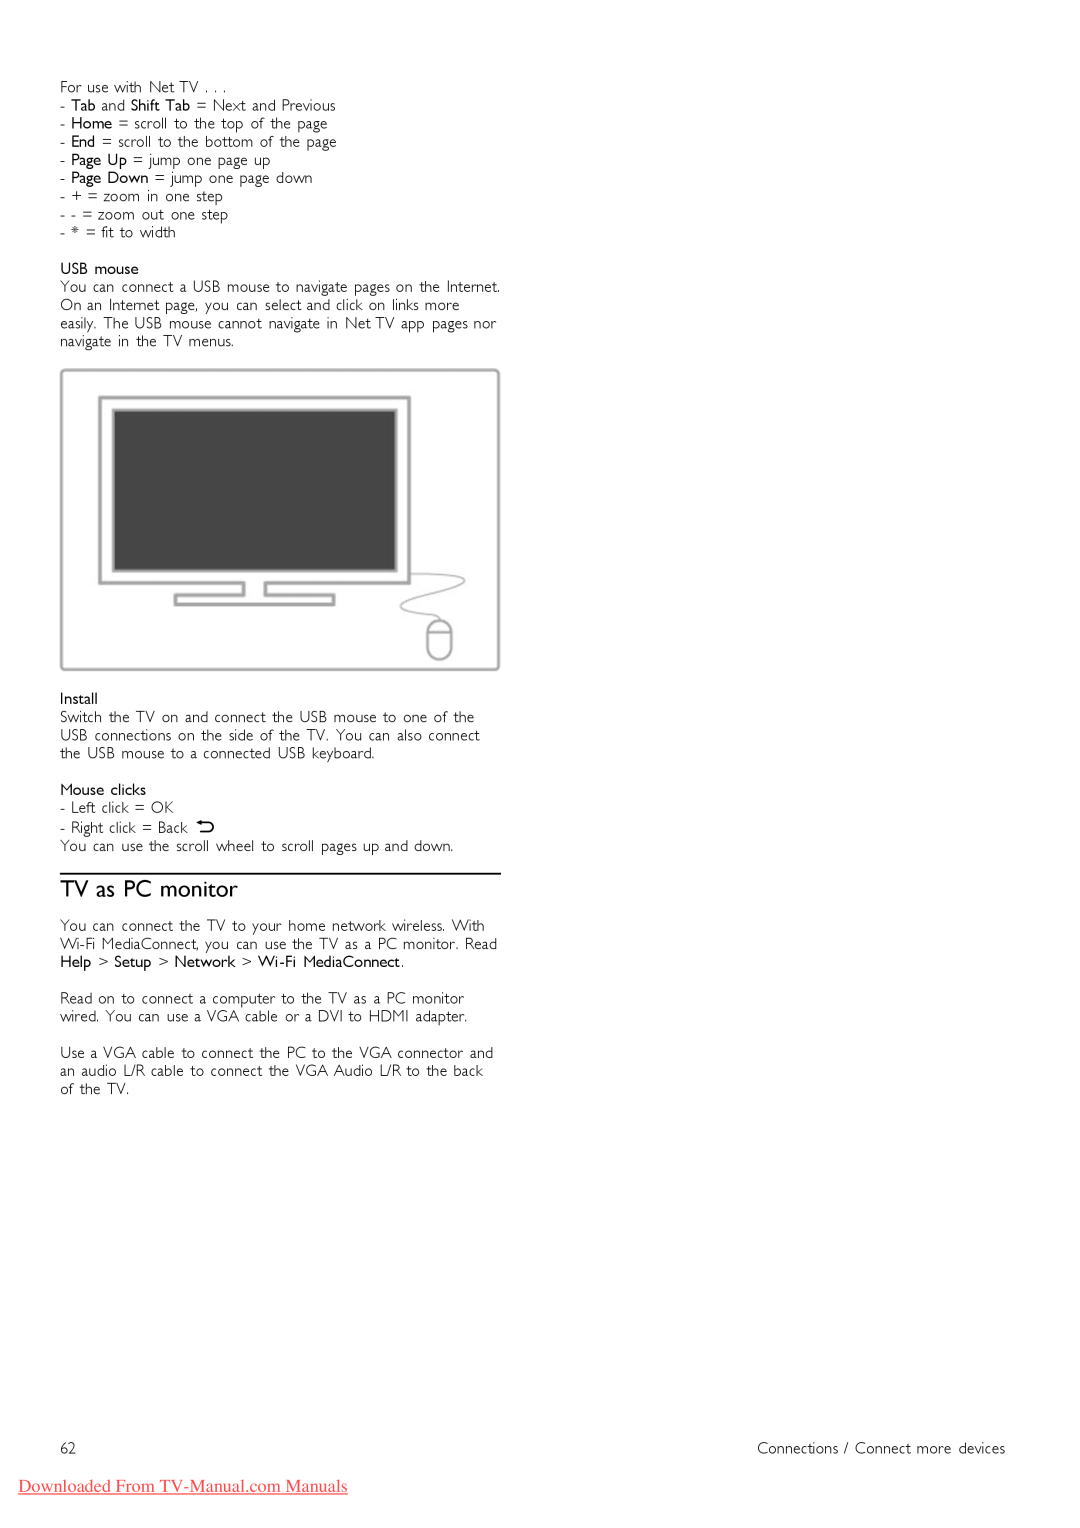 Philips 52PFL9606, 37PFL9606, 32PFL9606, 46PFL9706 manual TV as PC monitor, Downloaded From TV-Manual.com Manuals 